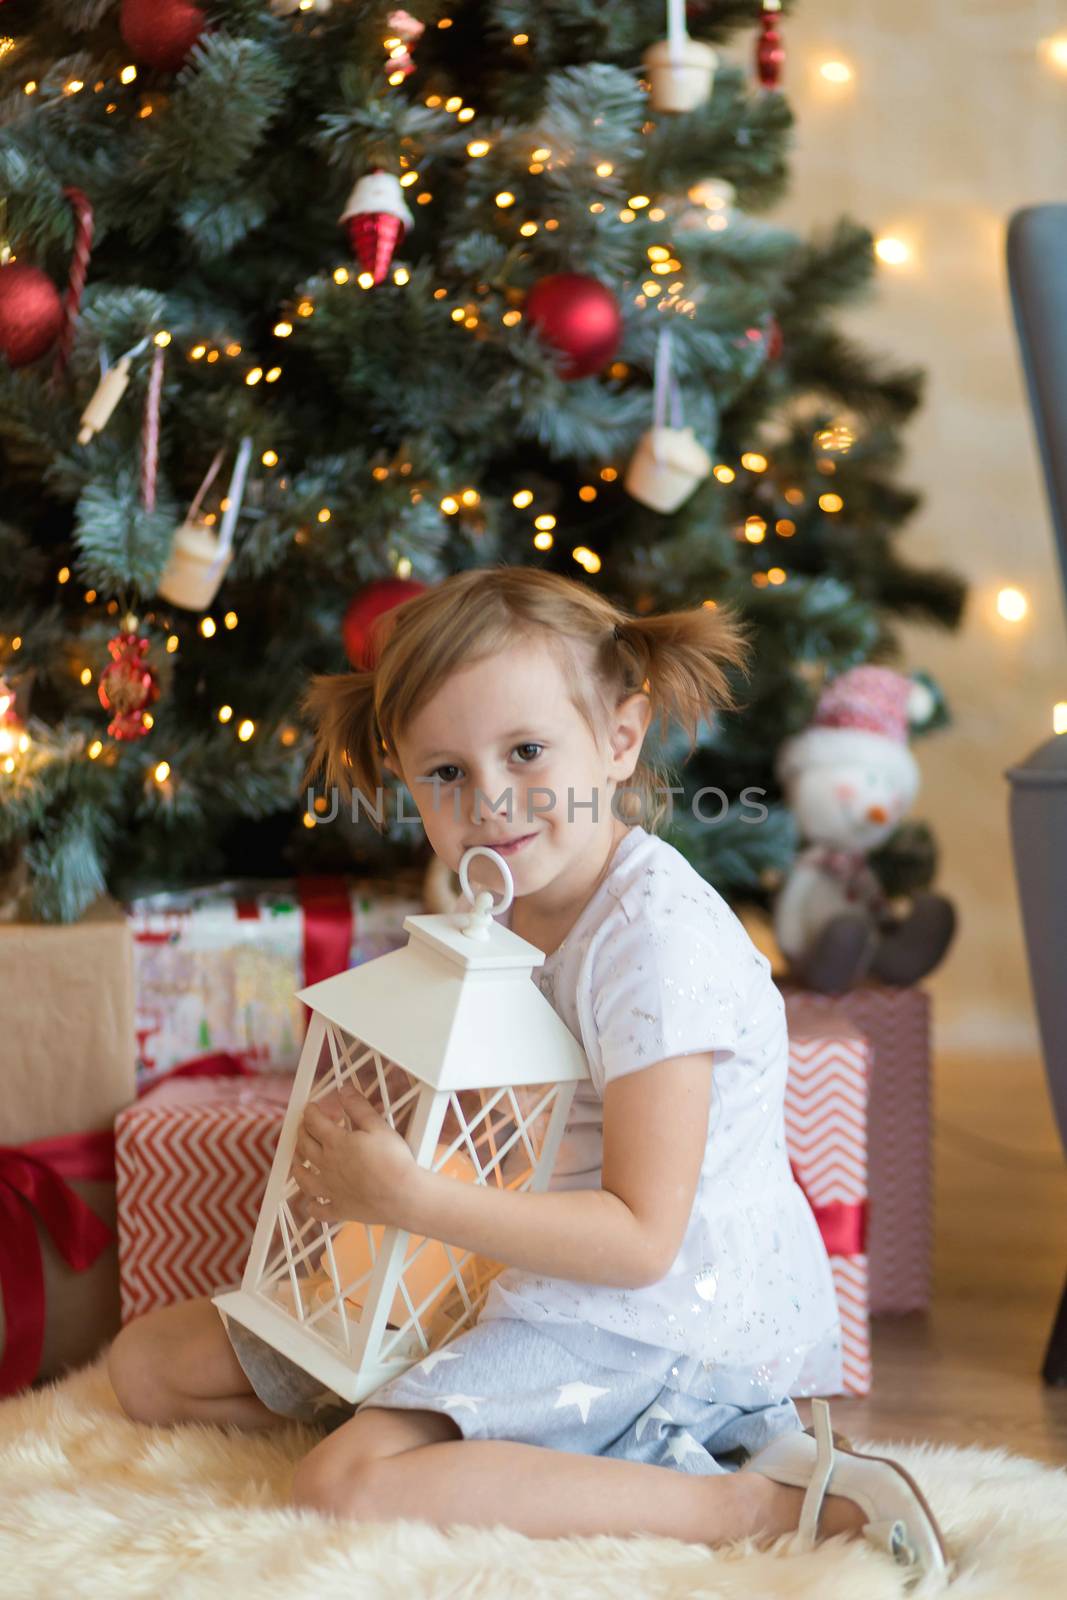 Pretty little child is sitting in front of christmas tree among garlands by galinasharapova